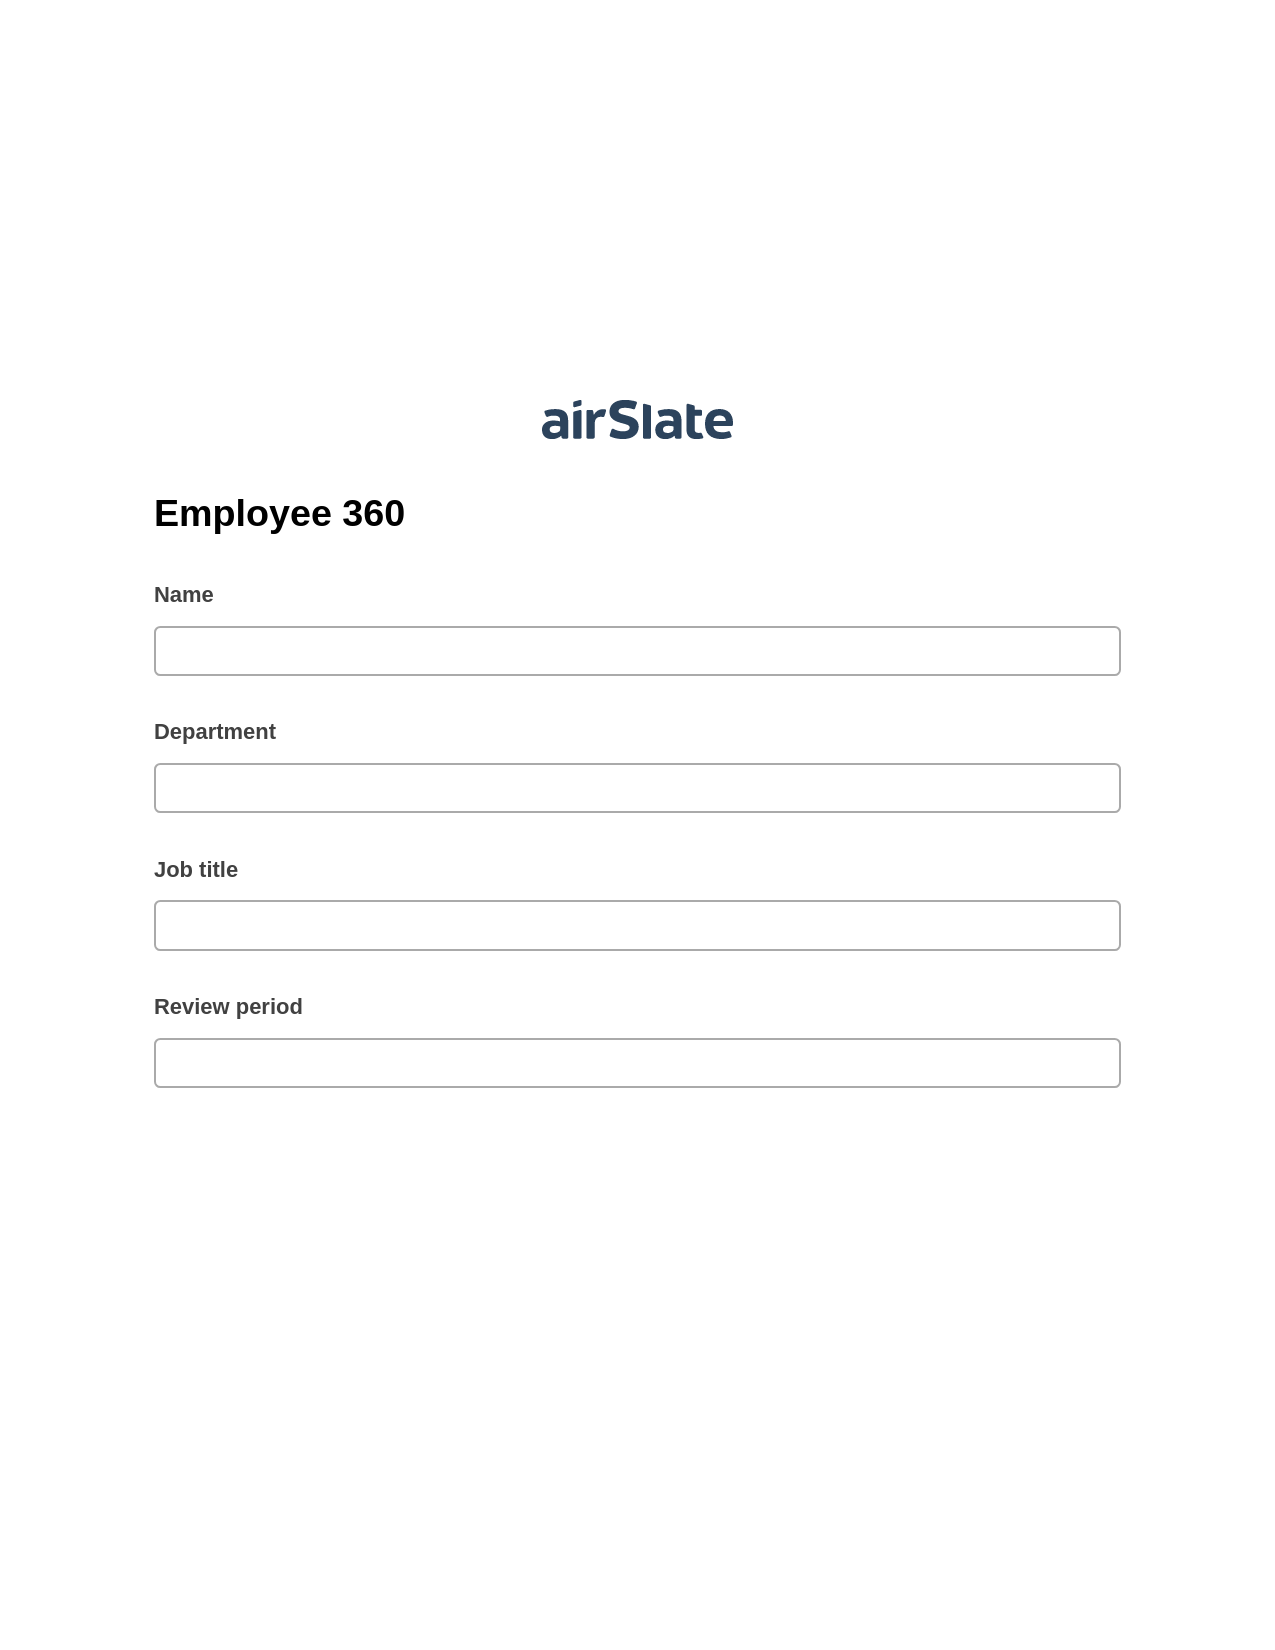 Employee 360 Pre-fill from Google Sheets Bot, Update MS Dynamics 365 Record Bot, Archive to Google Drive Bot